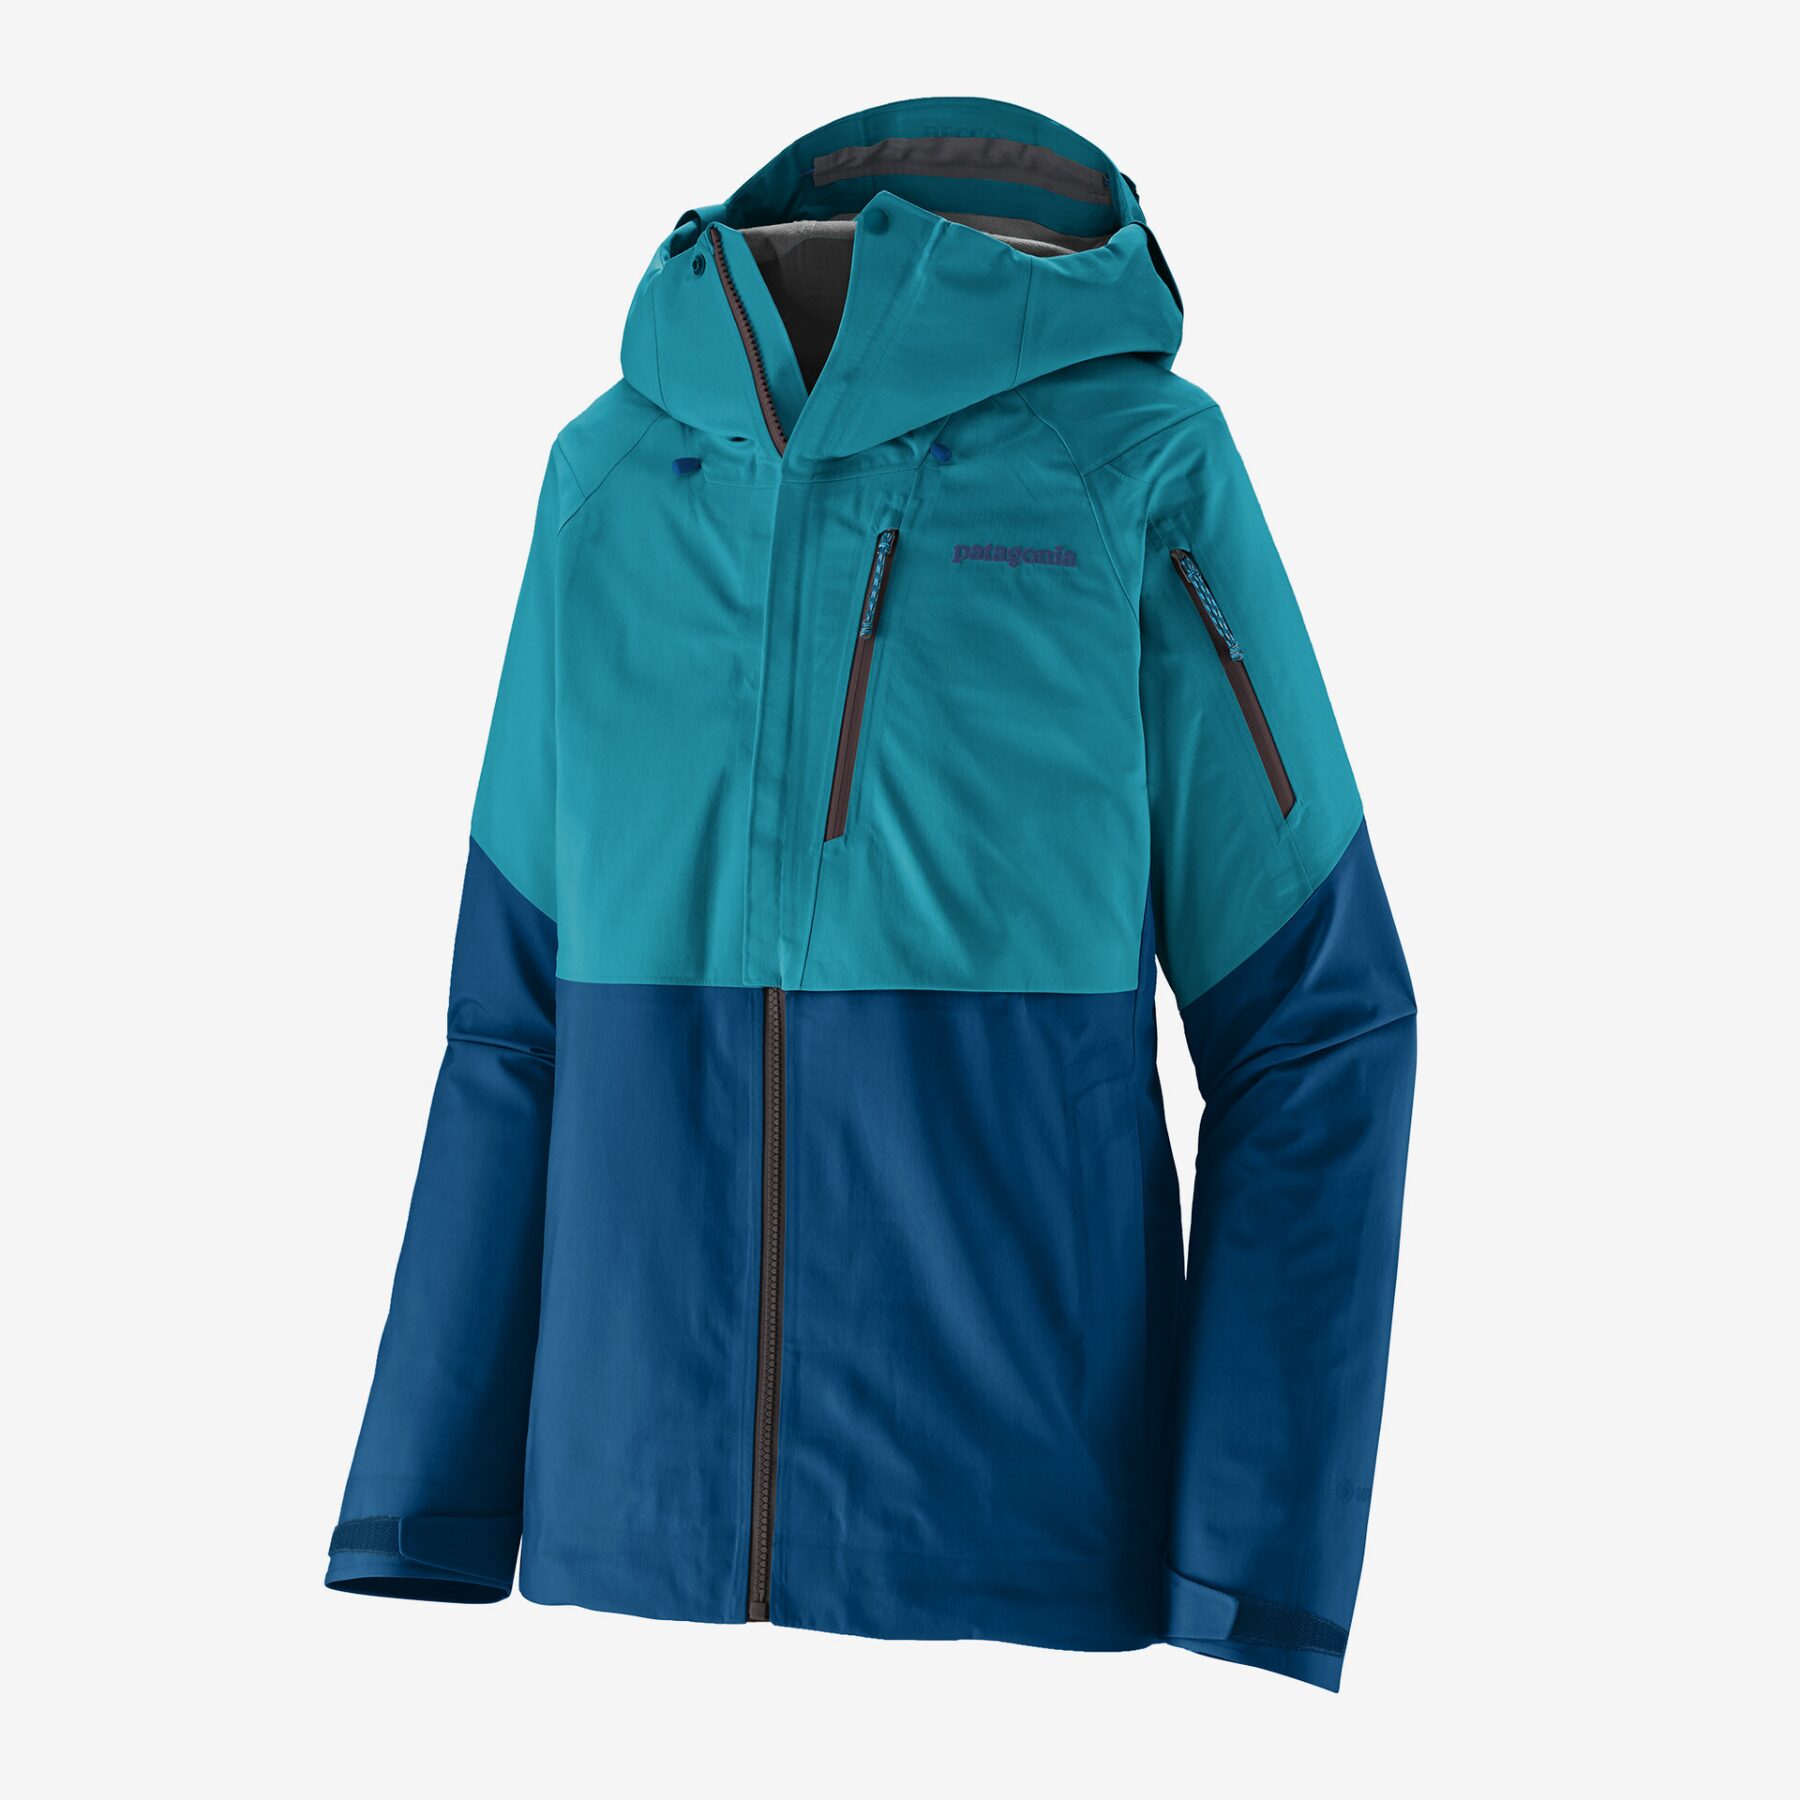 Kristin Sinnott reviews the Patagonia Untracked Jacket and Bibs for BLISTER.